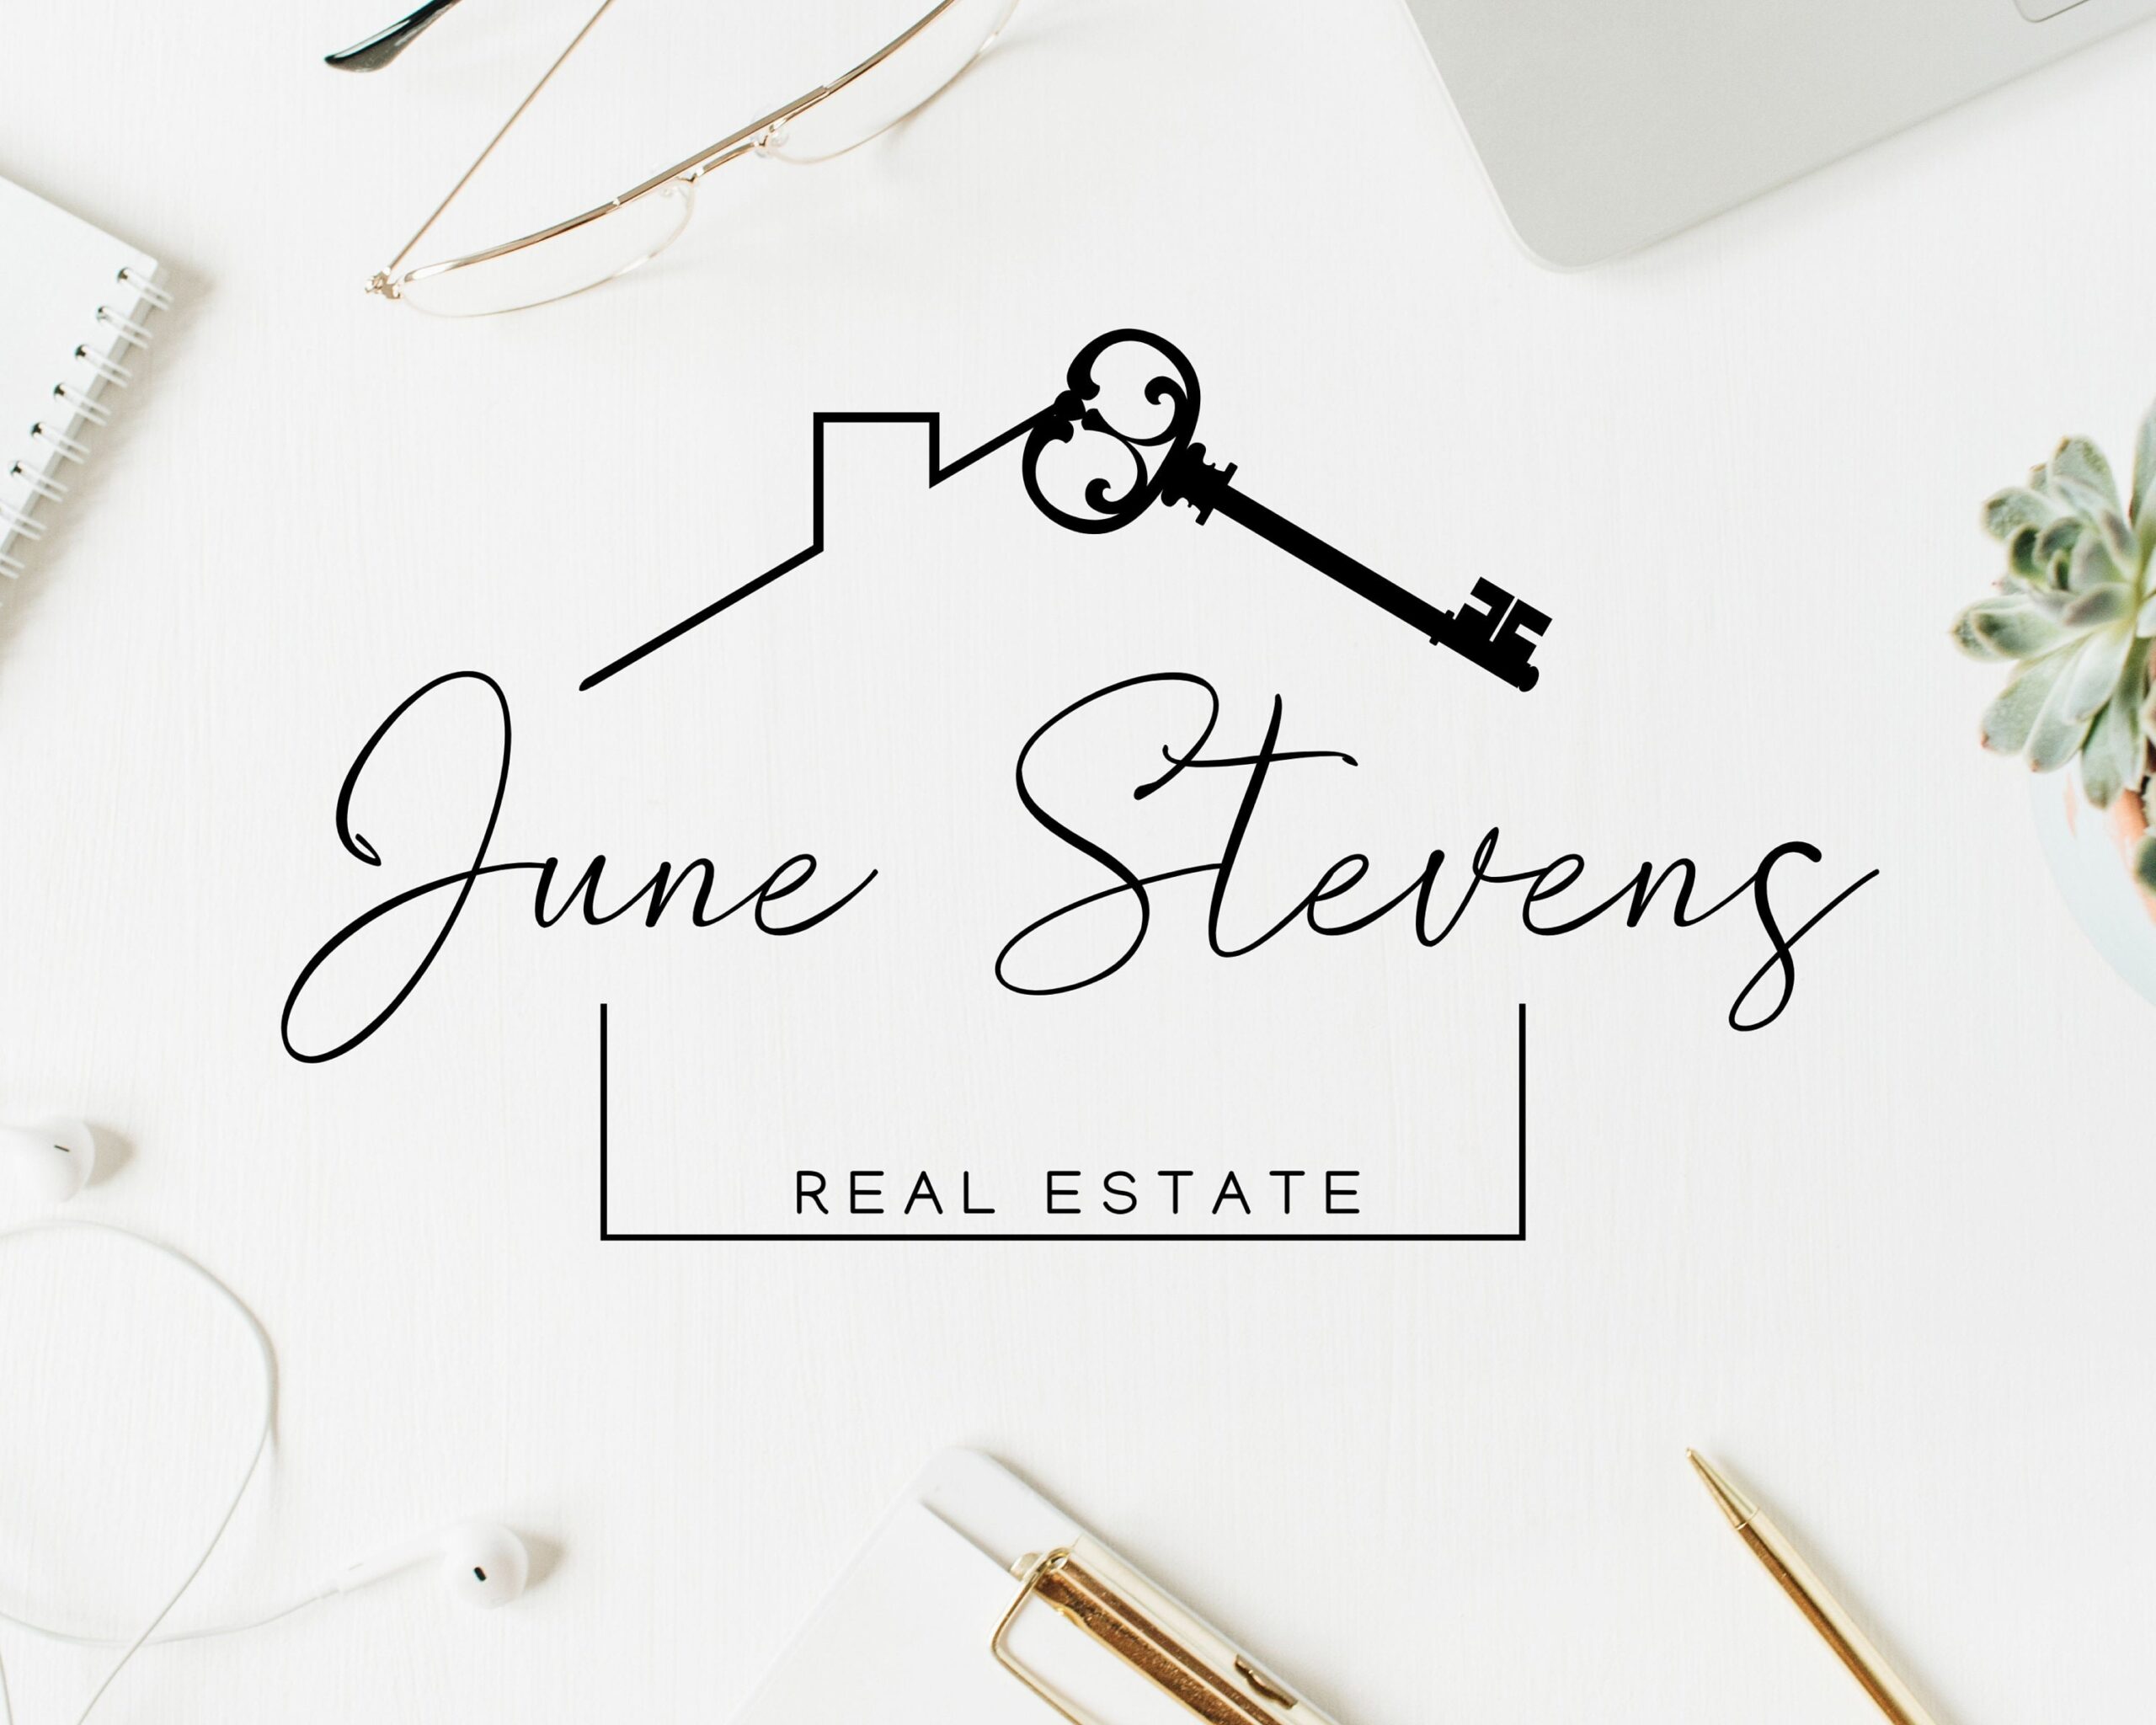 Real Estate Logo Design - Signature Home & Key - Logo -  Sub-mark and Watermarks -  High-Quality Branding for Real Estate Agents